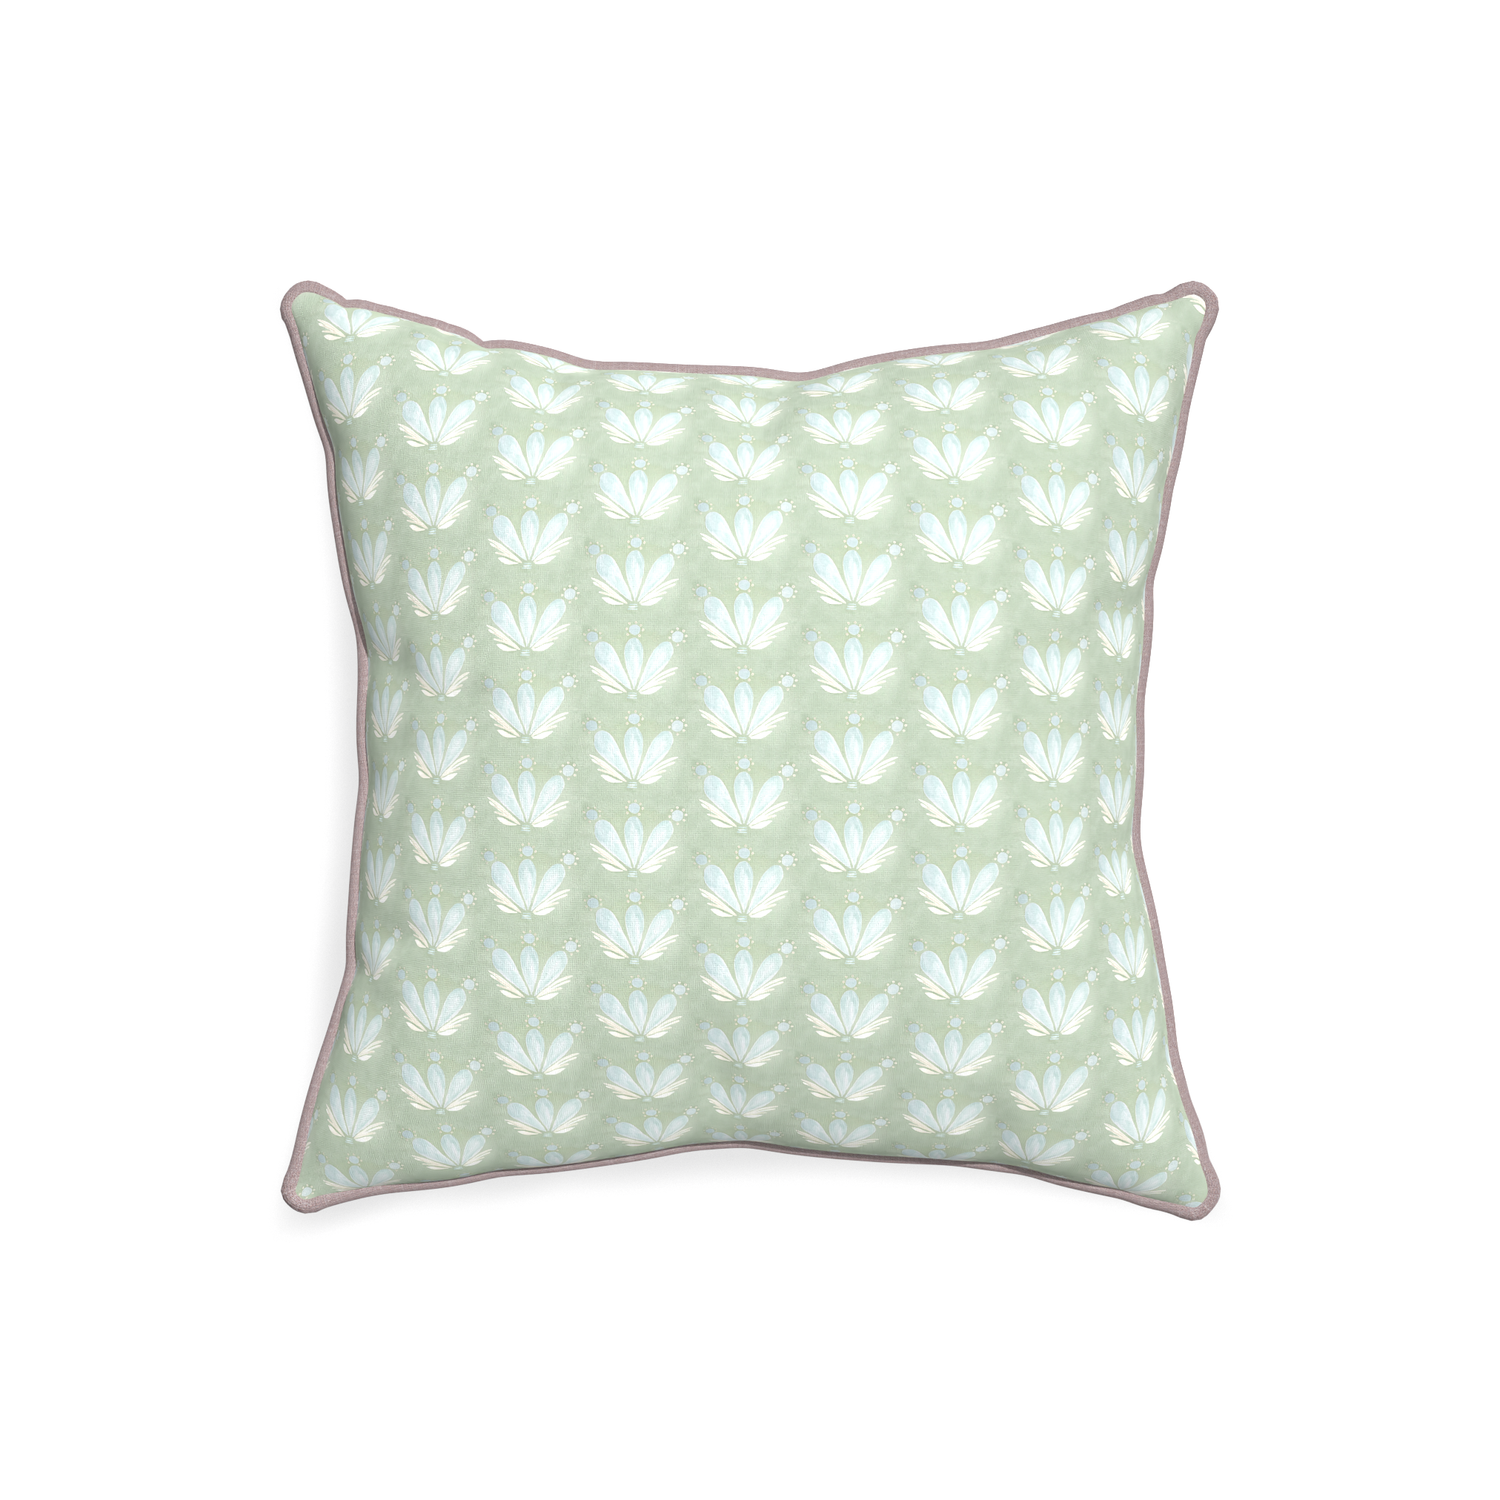 20-square serena sea salt custom blue & green floral drop repeatpillow with orchid piping on white background